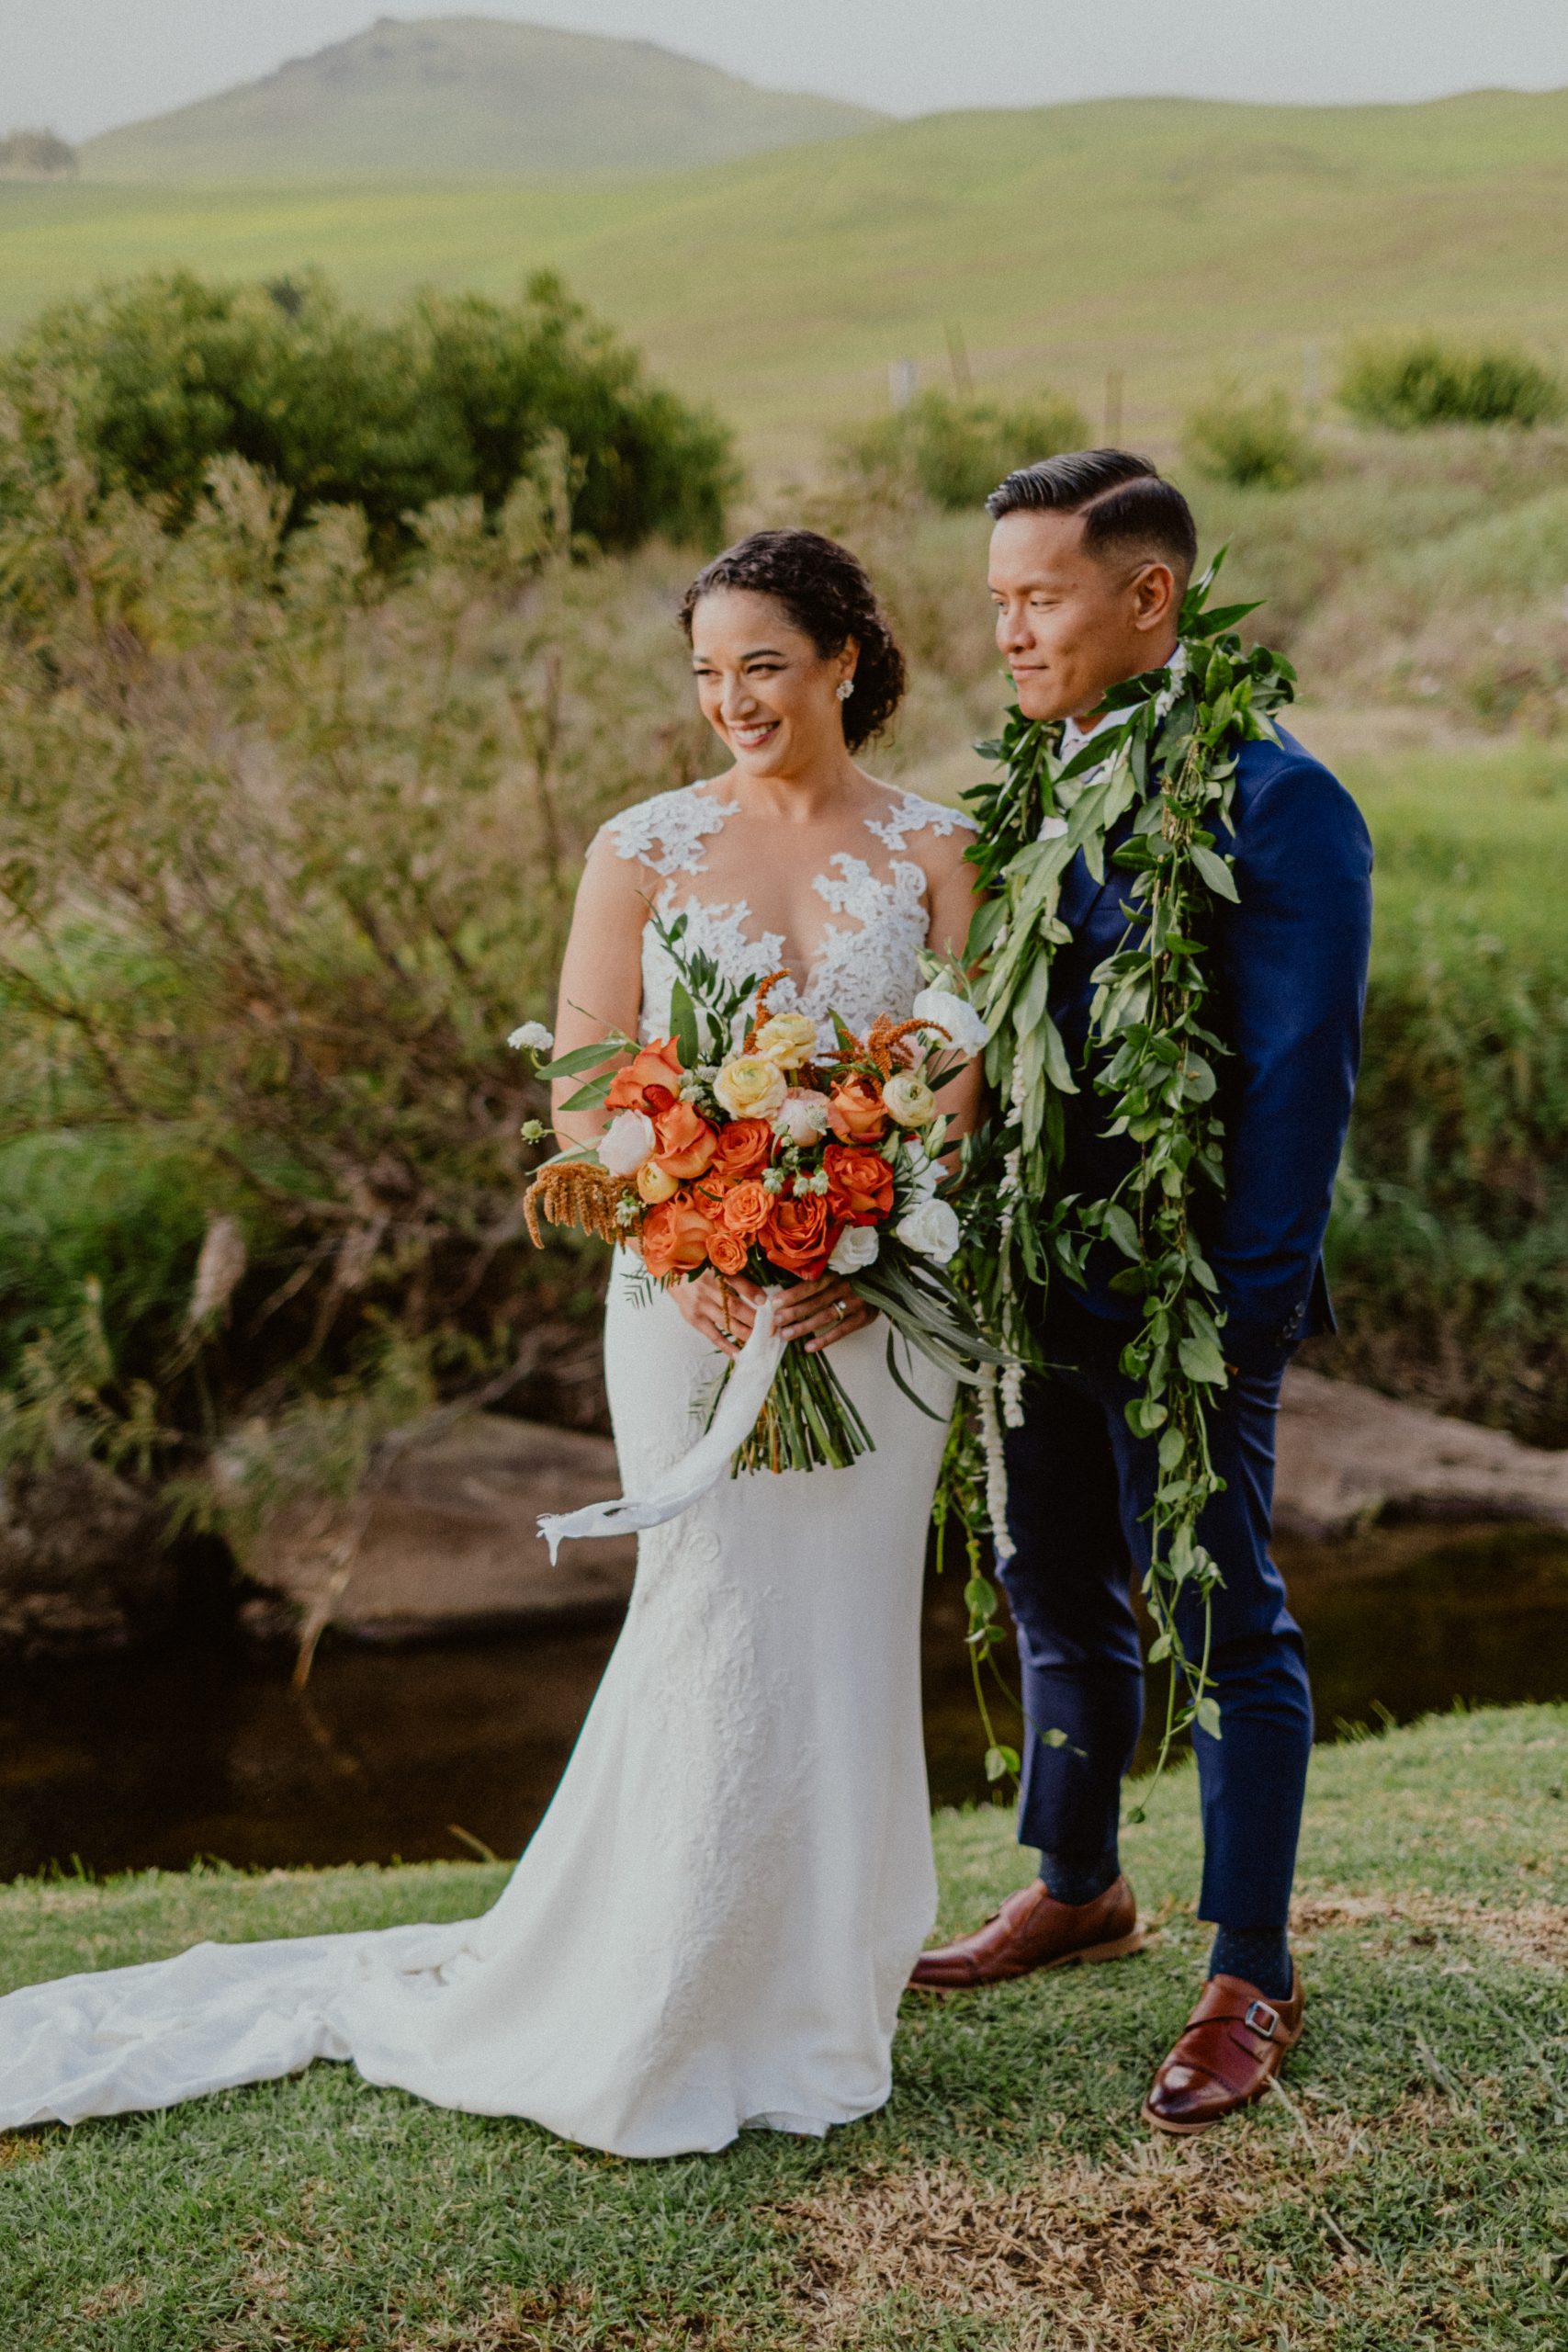 Fall bride and groom wedding photography for Hawaii wedding day inspiration of bride and groom with wedding bouquet and traditional Hawaii wedding photography | Big Island Elopement, Hawaii Elopement Photographer, Hawaii Elopement and Wedding Inspiration, Hawaii Elopement ideas, Big Island Wedding Inspiration, Fall Hawaiian Wedding Ideas, Fall Wedding Inspiration, Hawaii Outdoor Wedding Ideas | chelseaabril.com